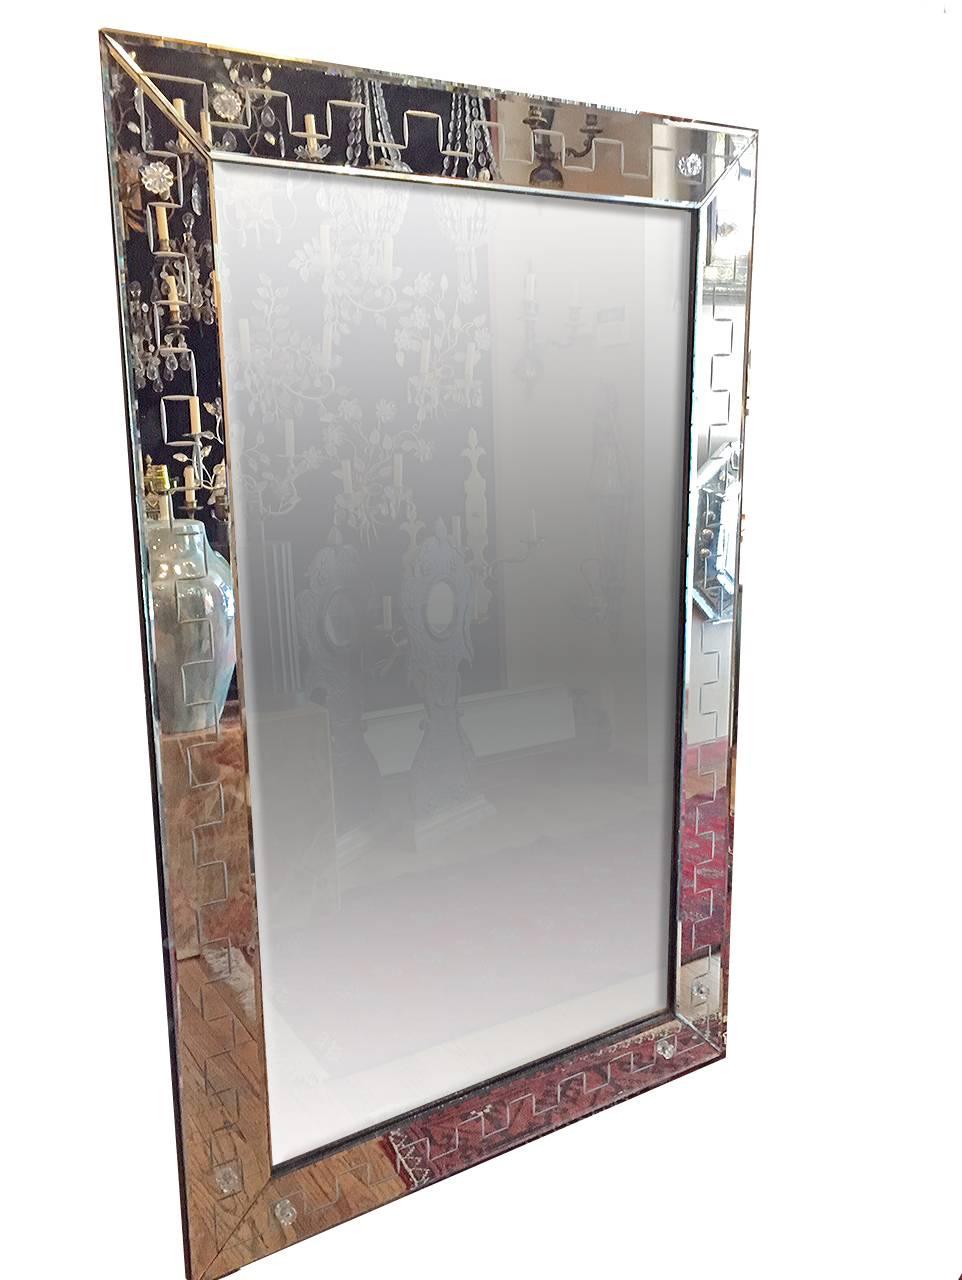 A circa 1950’s Italian Etched Mirror with greek key design and beveled edge.

Measurements:
Height: 60″
Width: 36″


